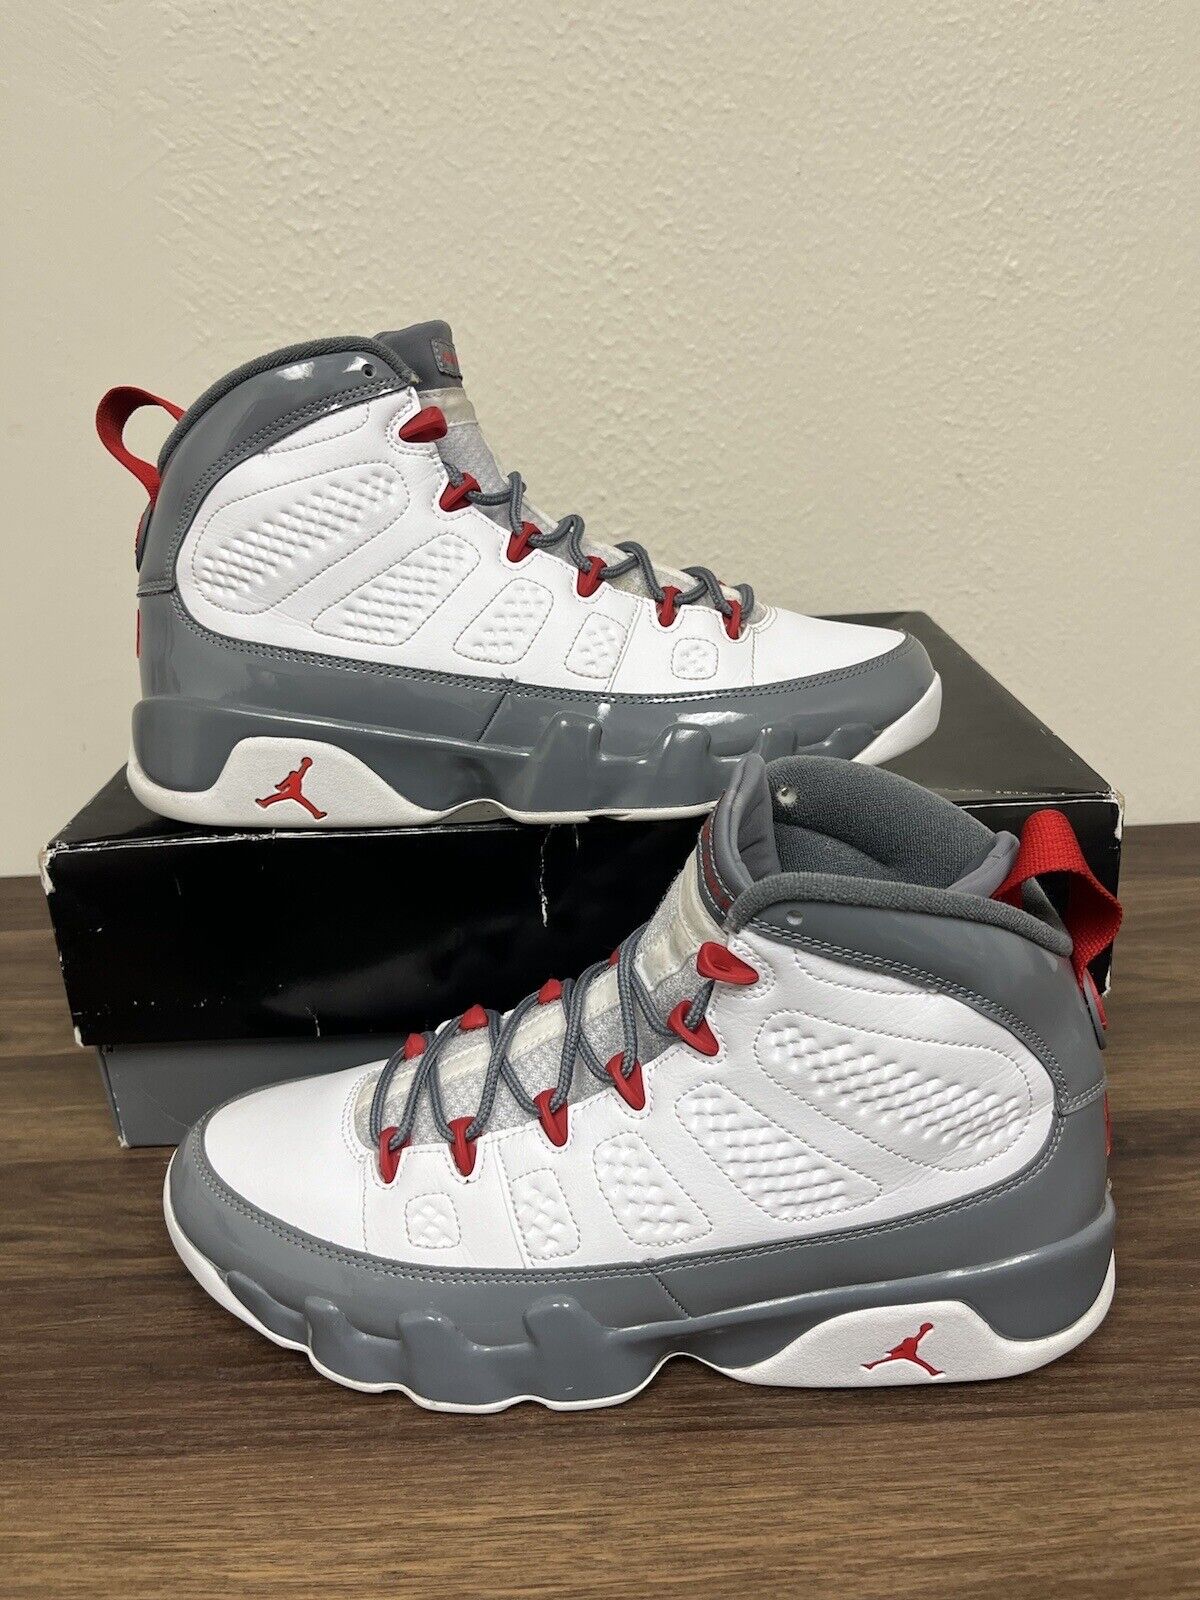 Size 10.5 - Air Jordan 9 Retro Mid Fire Red 100% Authentic